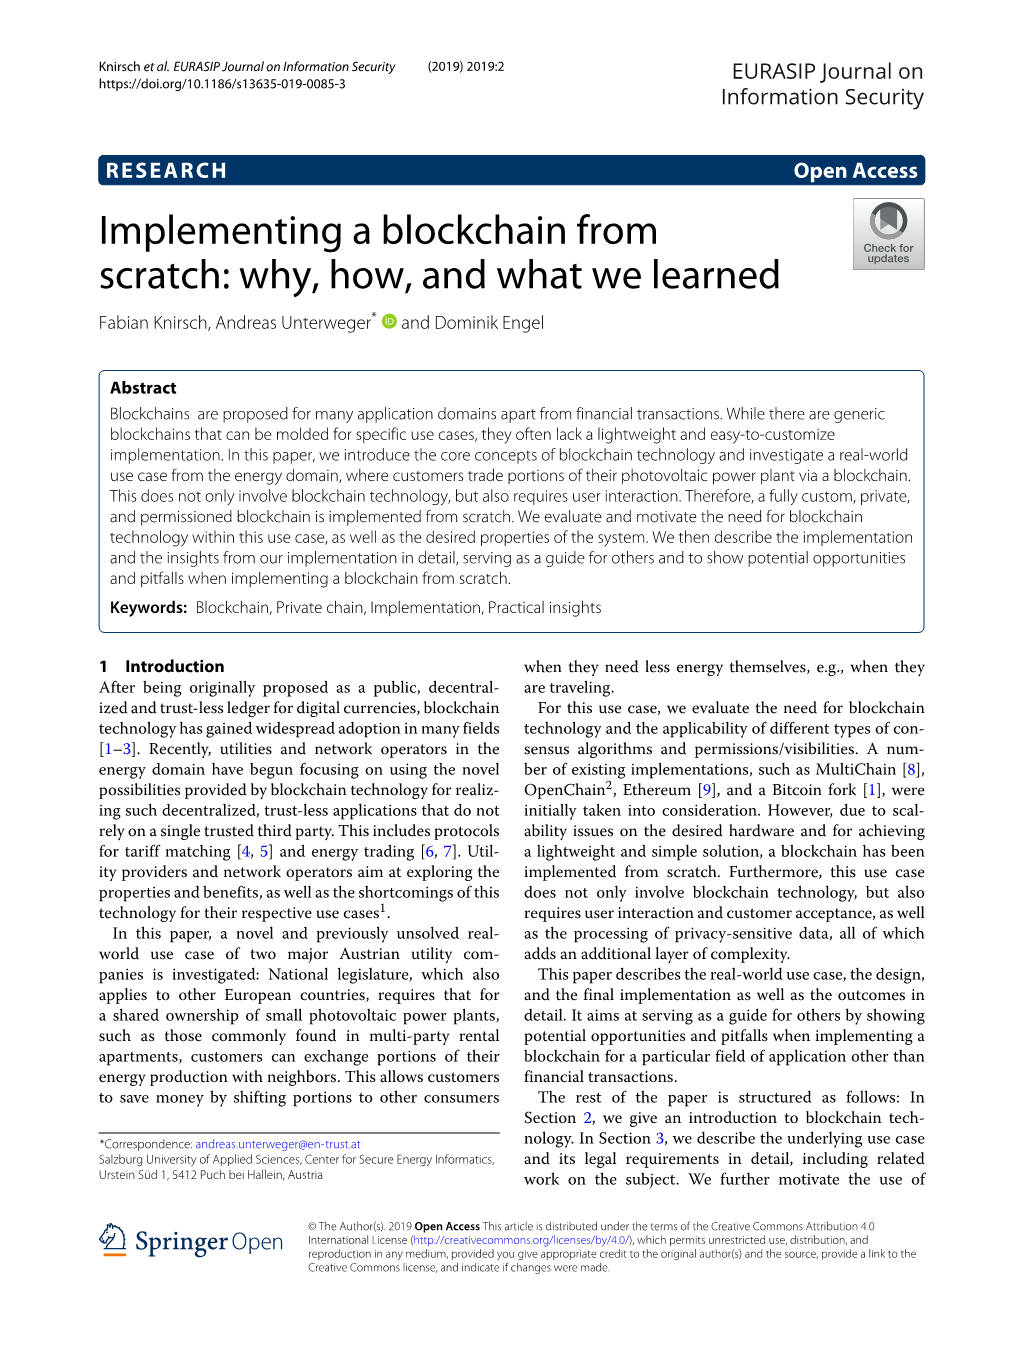 Implementing a Blockchain from Scratch: Why, How, and What We Learned Fabian Knirsch, Andreas Unterweger* and Dominik Engel